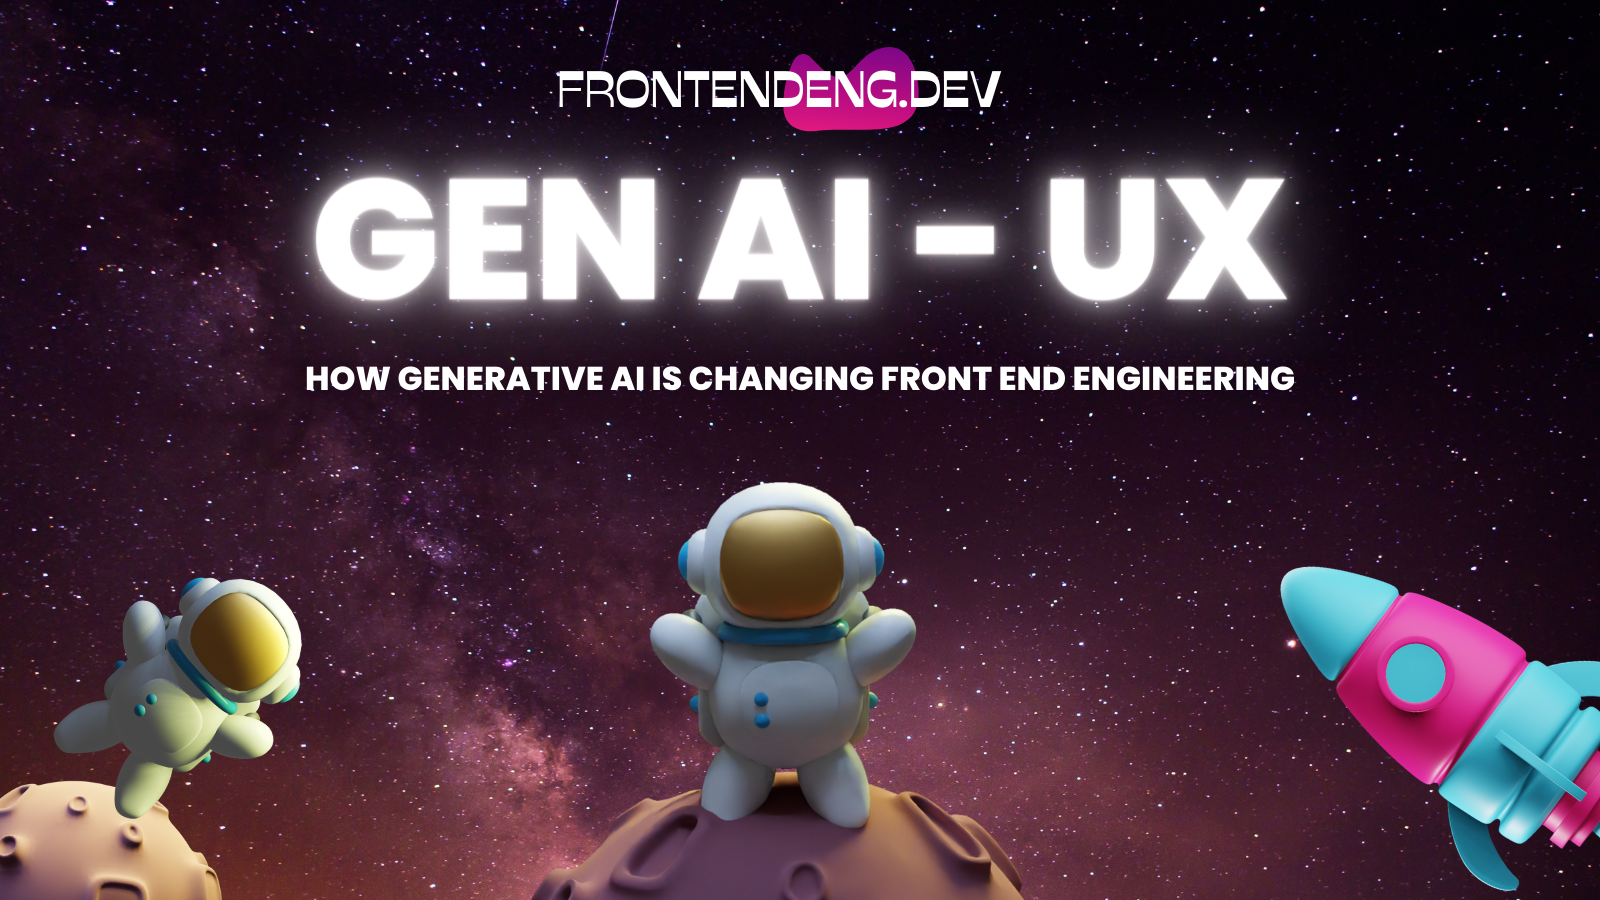 The new era of AI generated UX: How generative AI is going to change front-end engineering